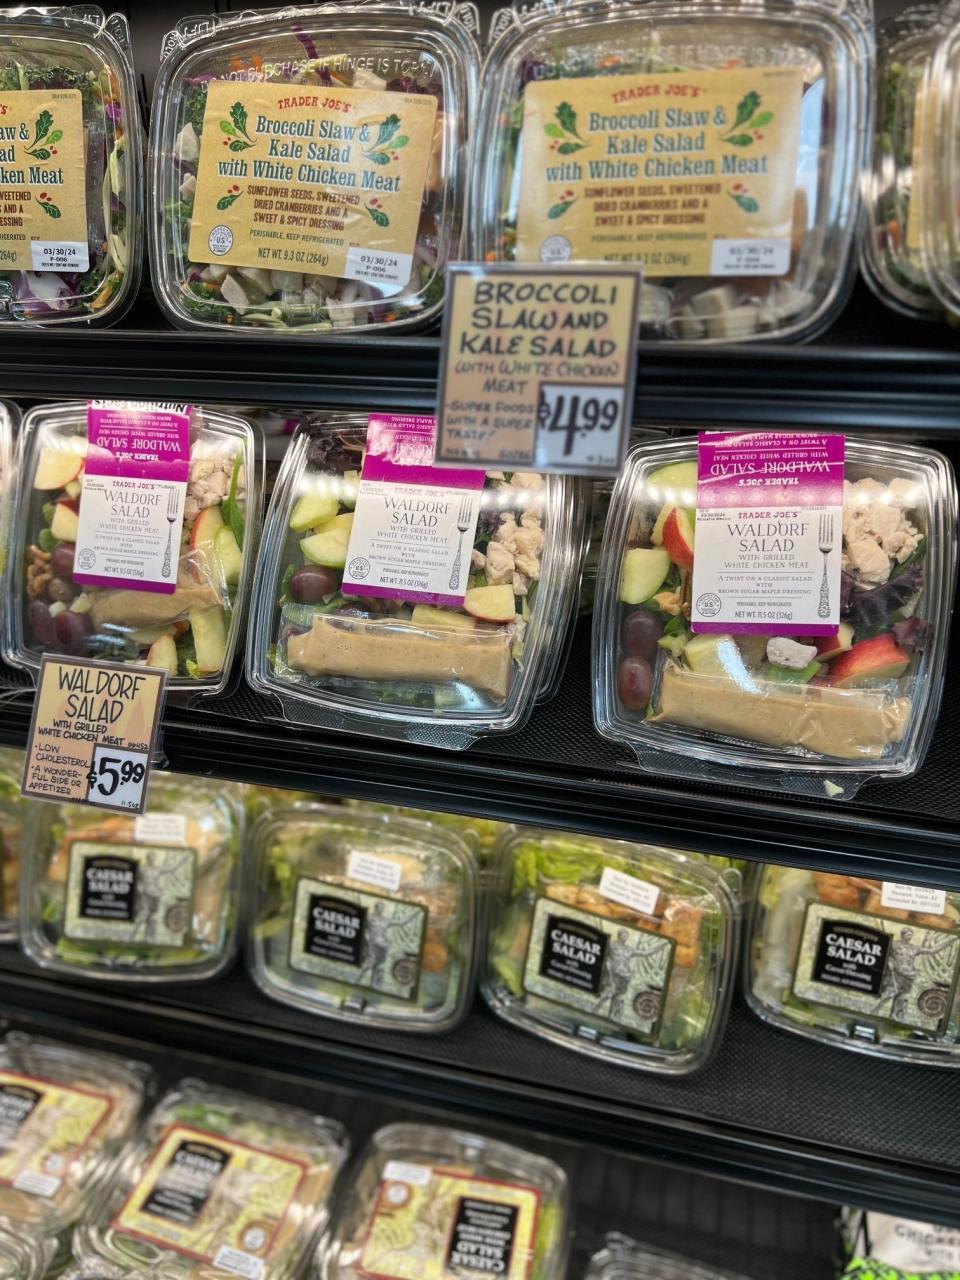 Pre-packaged salads on a store shelf, including Waldorf and Broccoli Kale Salad, priced at $5.99 and $11.99 respectively